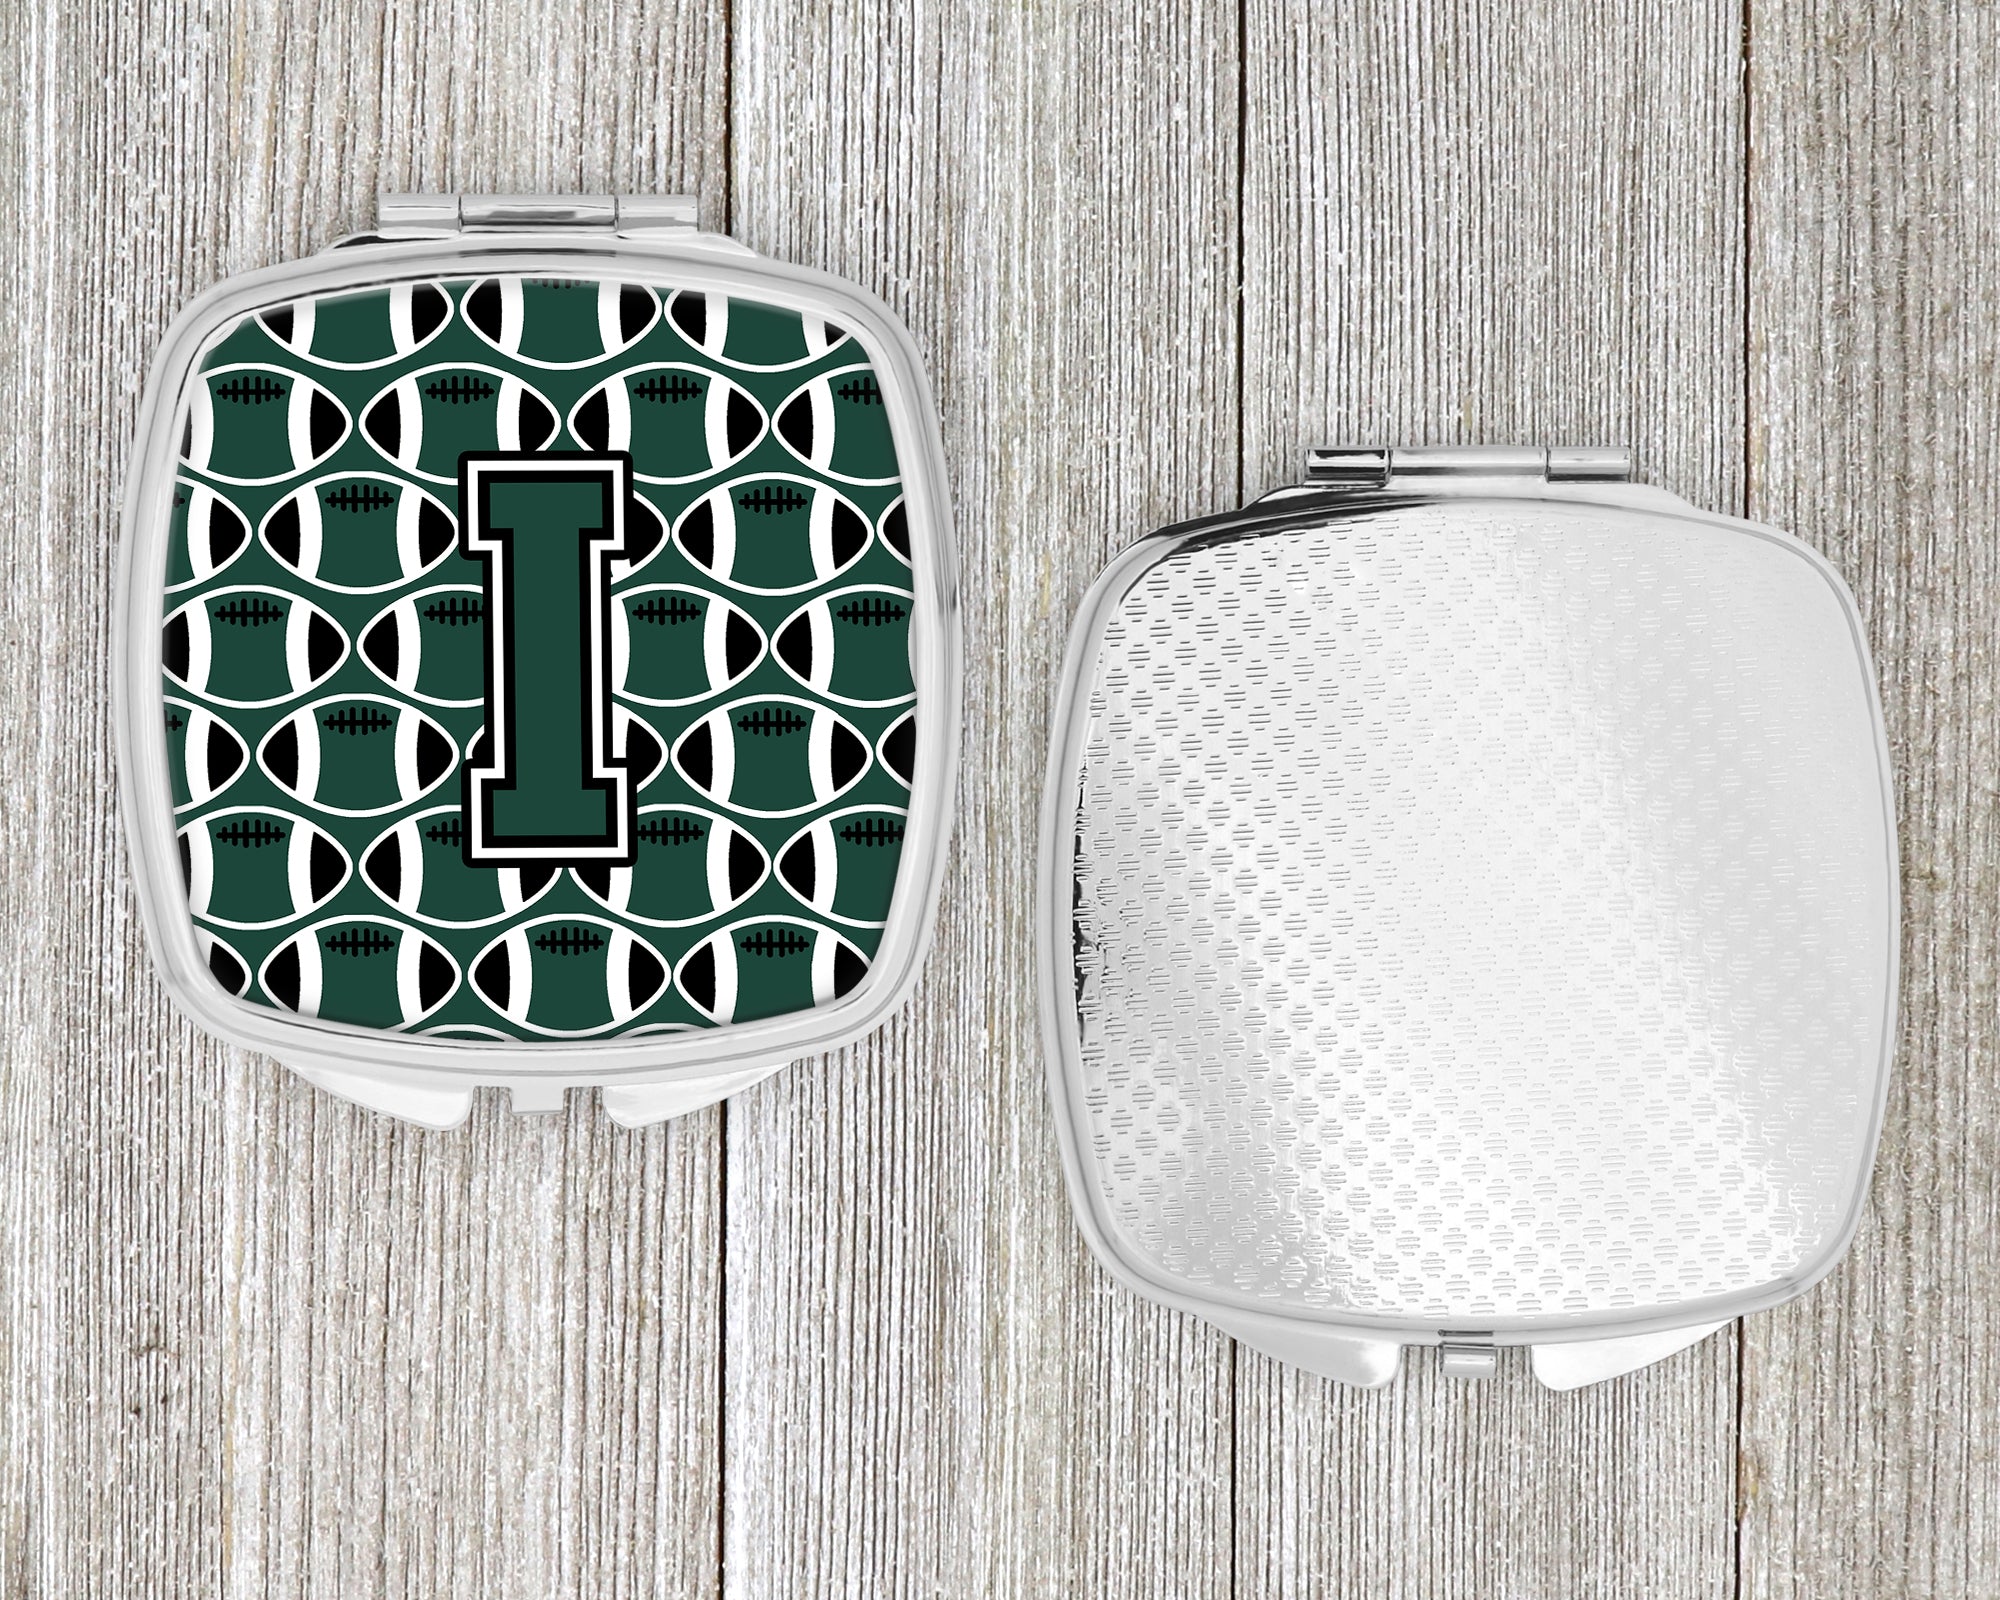 Letter I Football Green and White Compact Mirror CJ1071-ISCM  the-store.com.